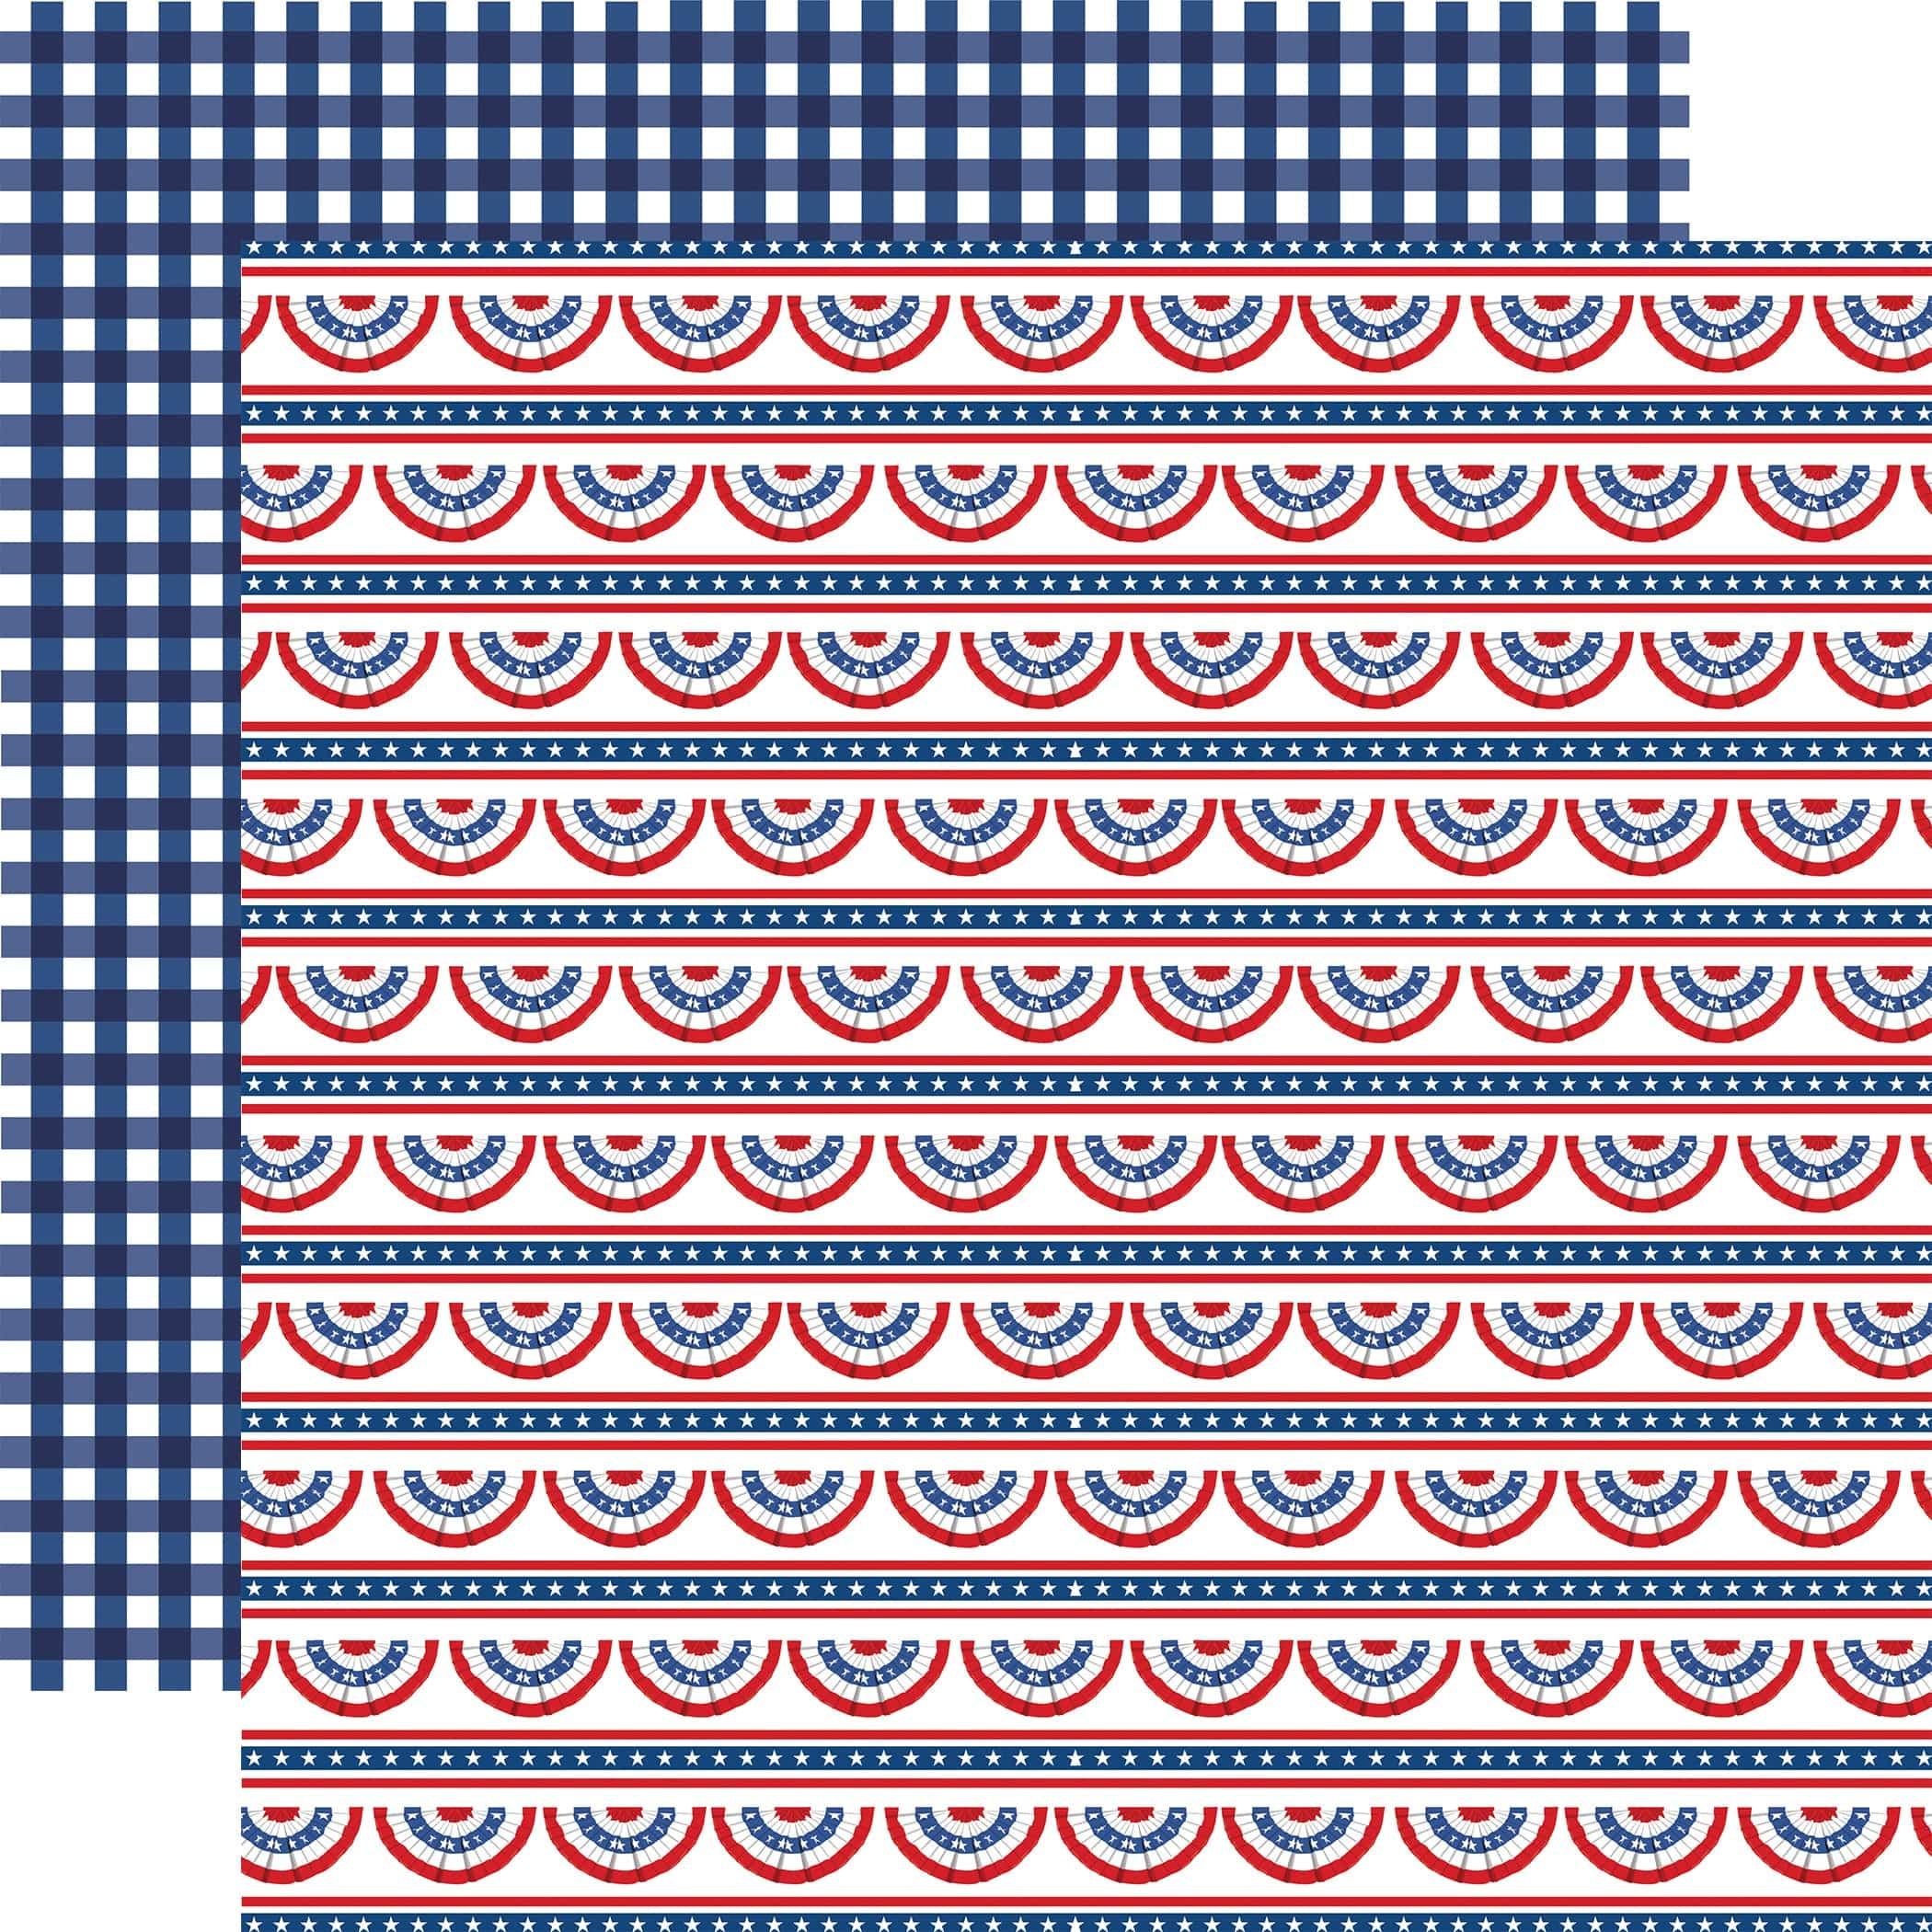 God Bless America Collection Bunting Banners 12 x 12 Double-Sided Scrapbook Paper by Carta Bella - Scrapbook Supply Companies